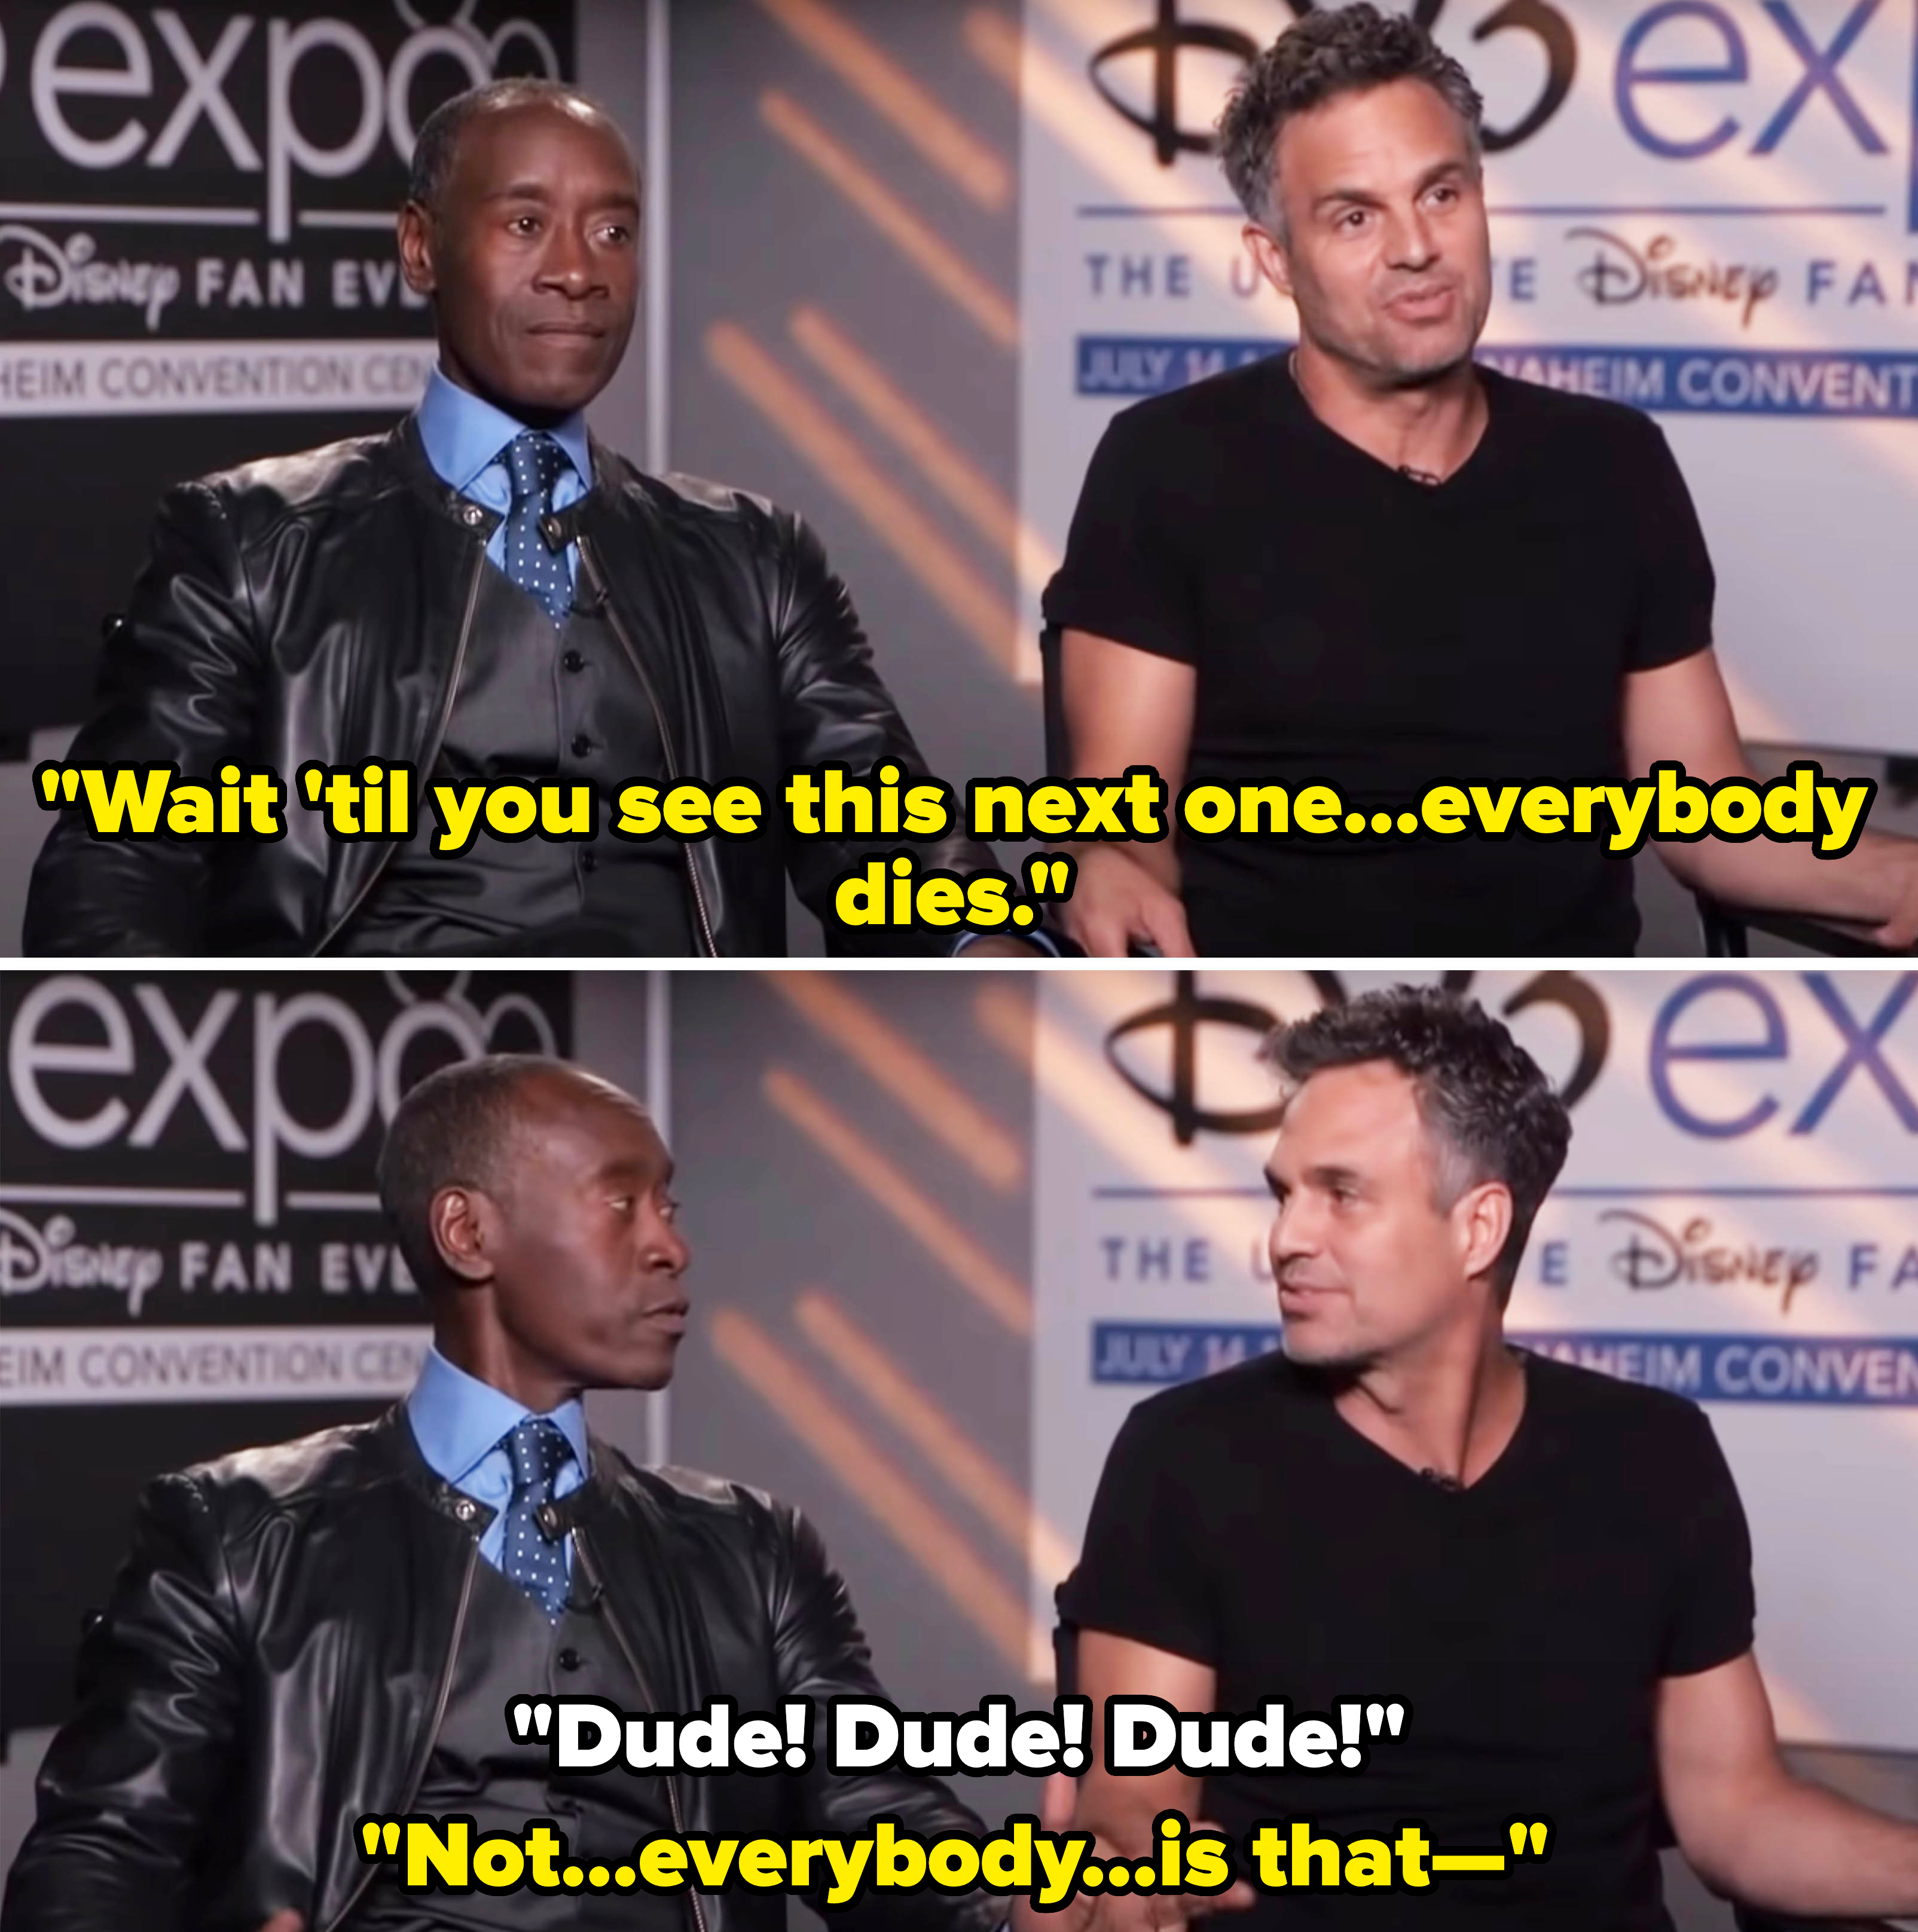 Mark Ruffalo saying everyone dies in the next Avengers movie, and Don Cheadle telling him to be quiet